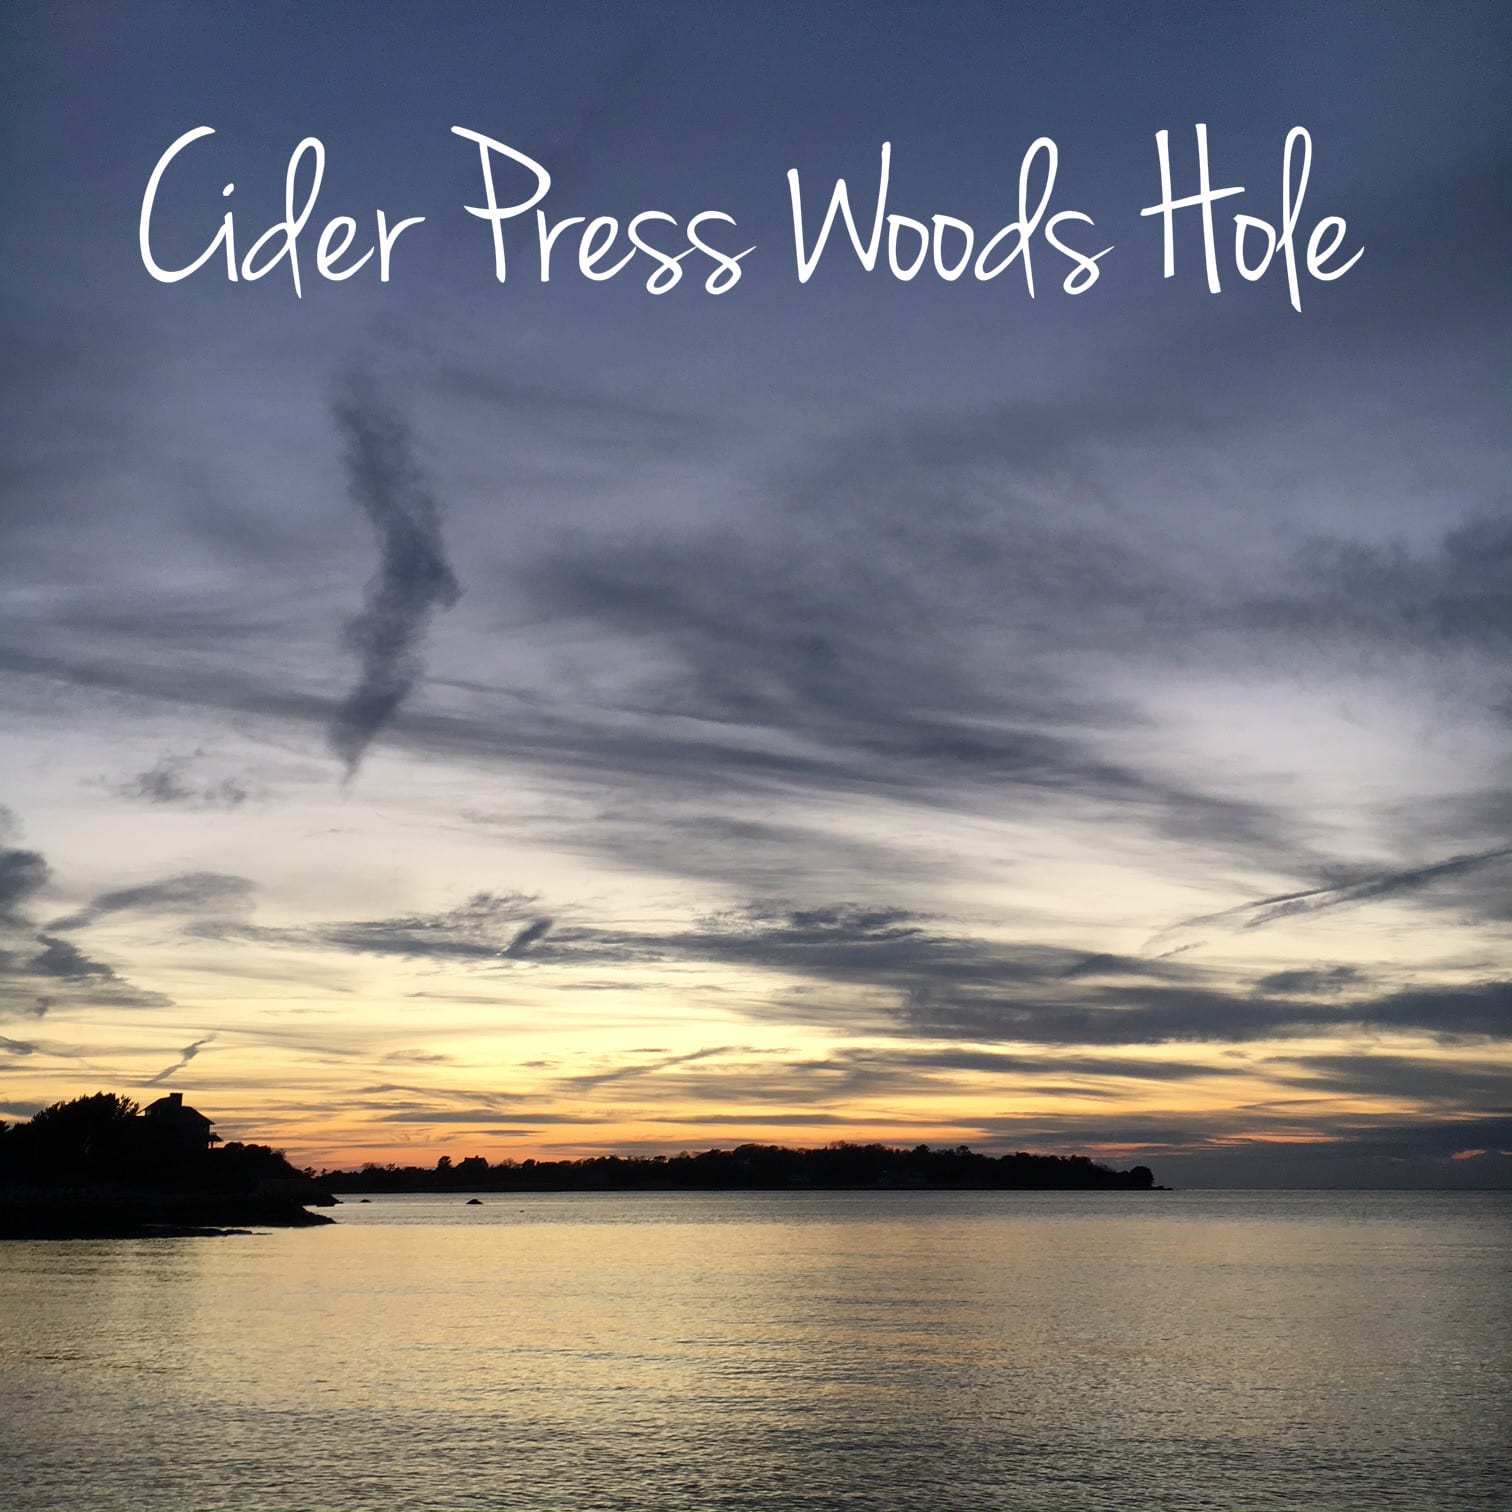 Cider Press in Woods Hole